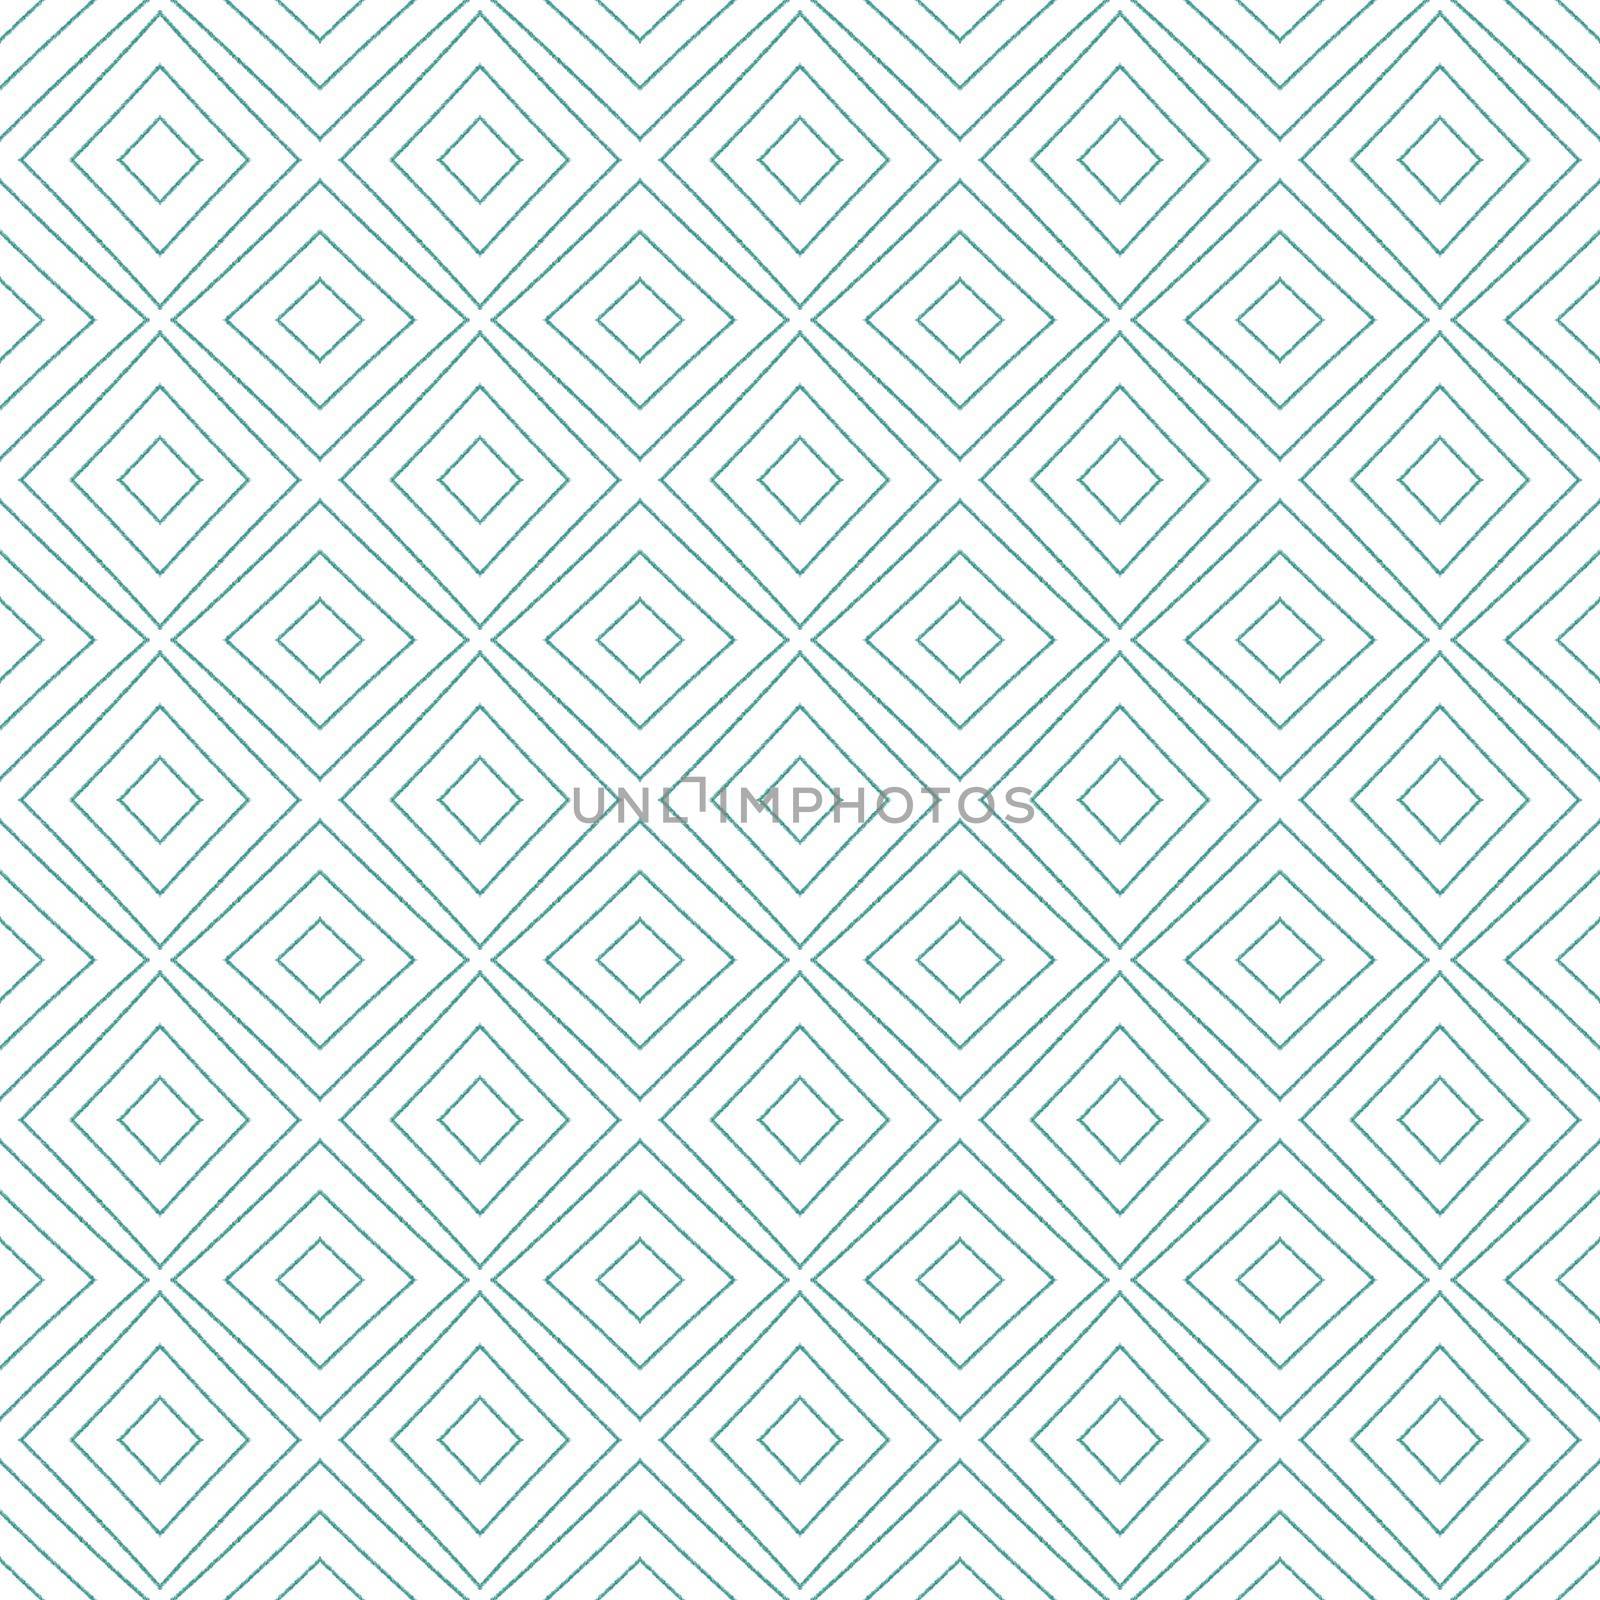 Striped hand drawn pattern. Turquoise symmetrical kaleidoscope background. Textile ready posh print, swimwear fabric, wallpaper, wrapping. Repeating striped hand drawn tile.